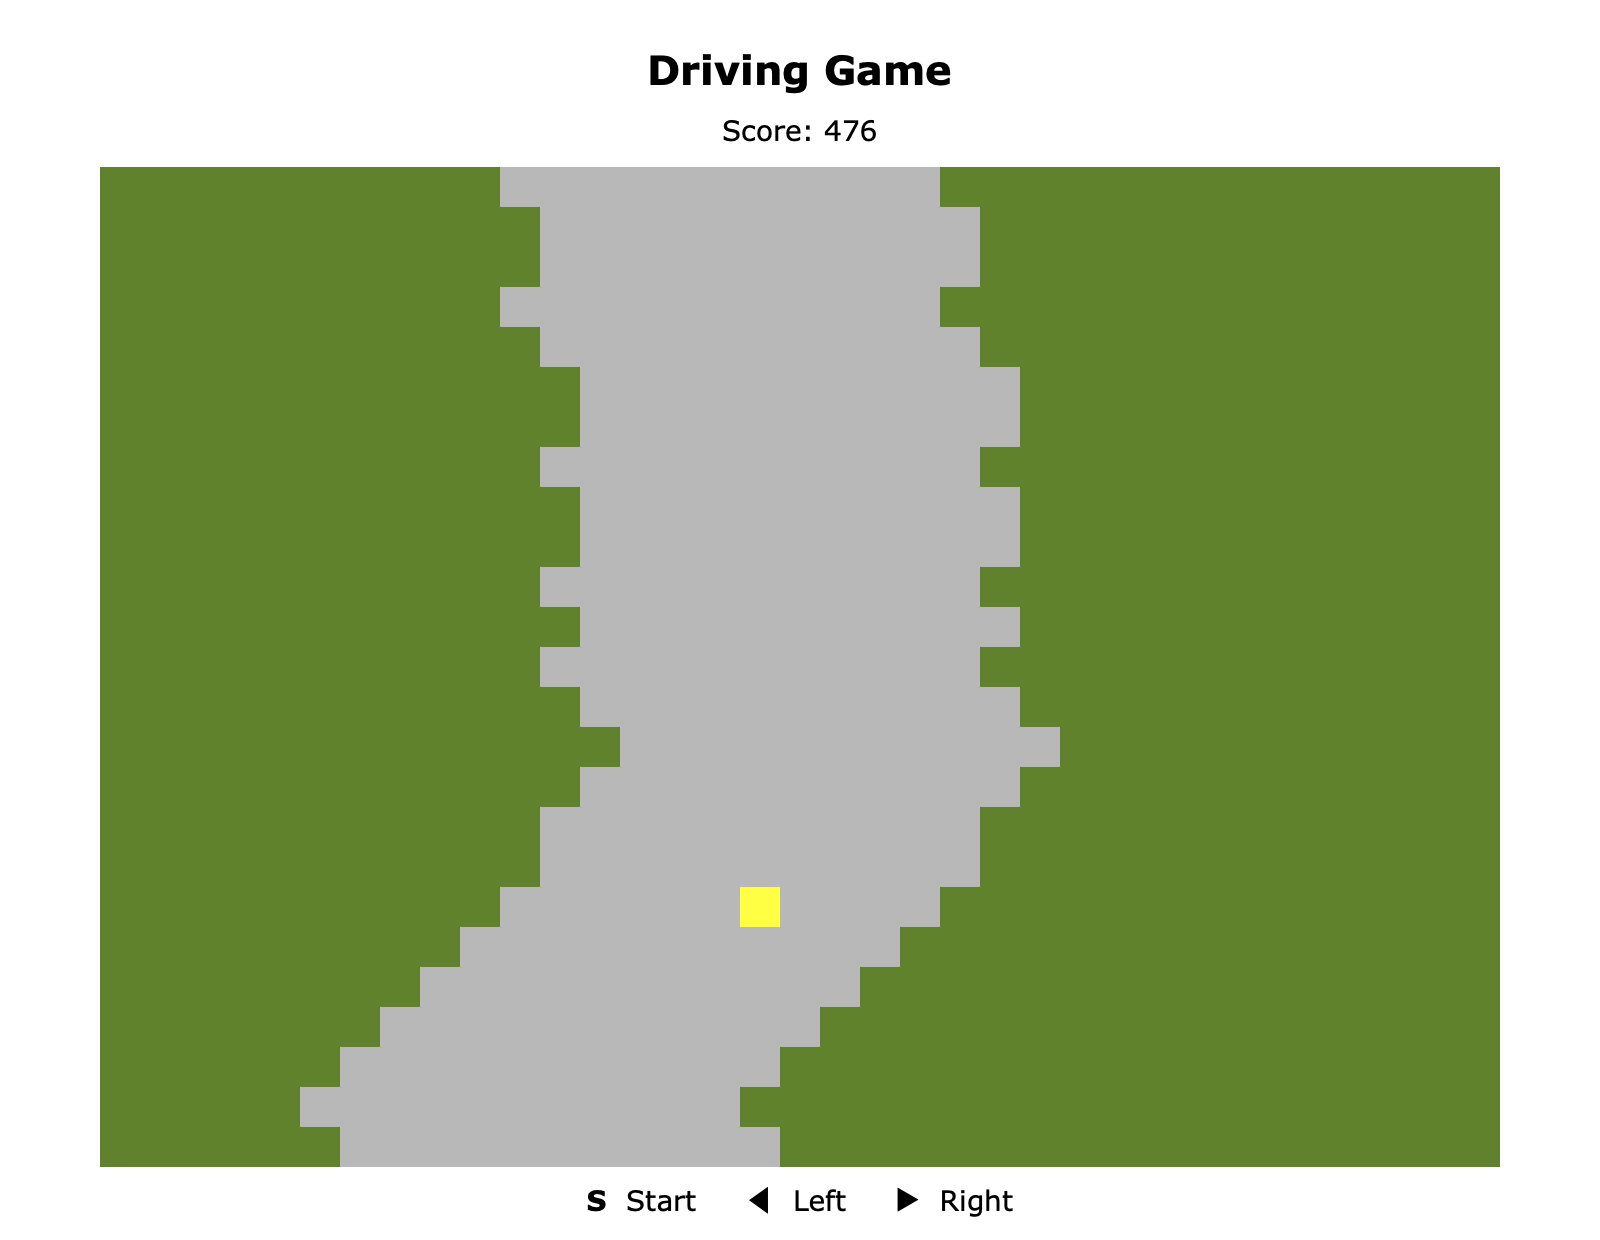 A screenshot of a simple game consisting of a top down view of a yellow block representing a car being driven along a blocky grey road amongst a green backdrop